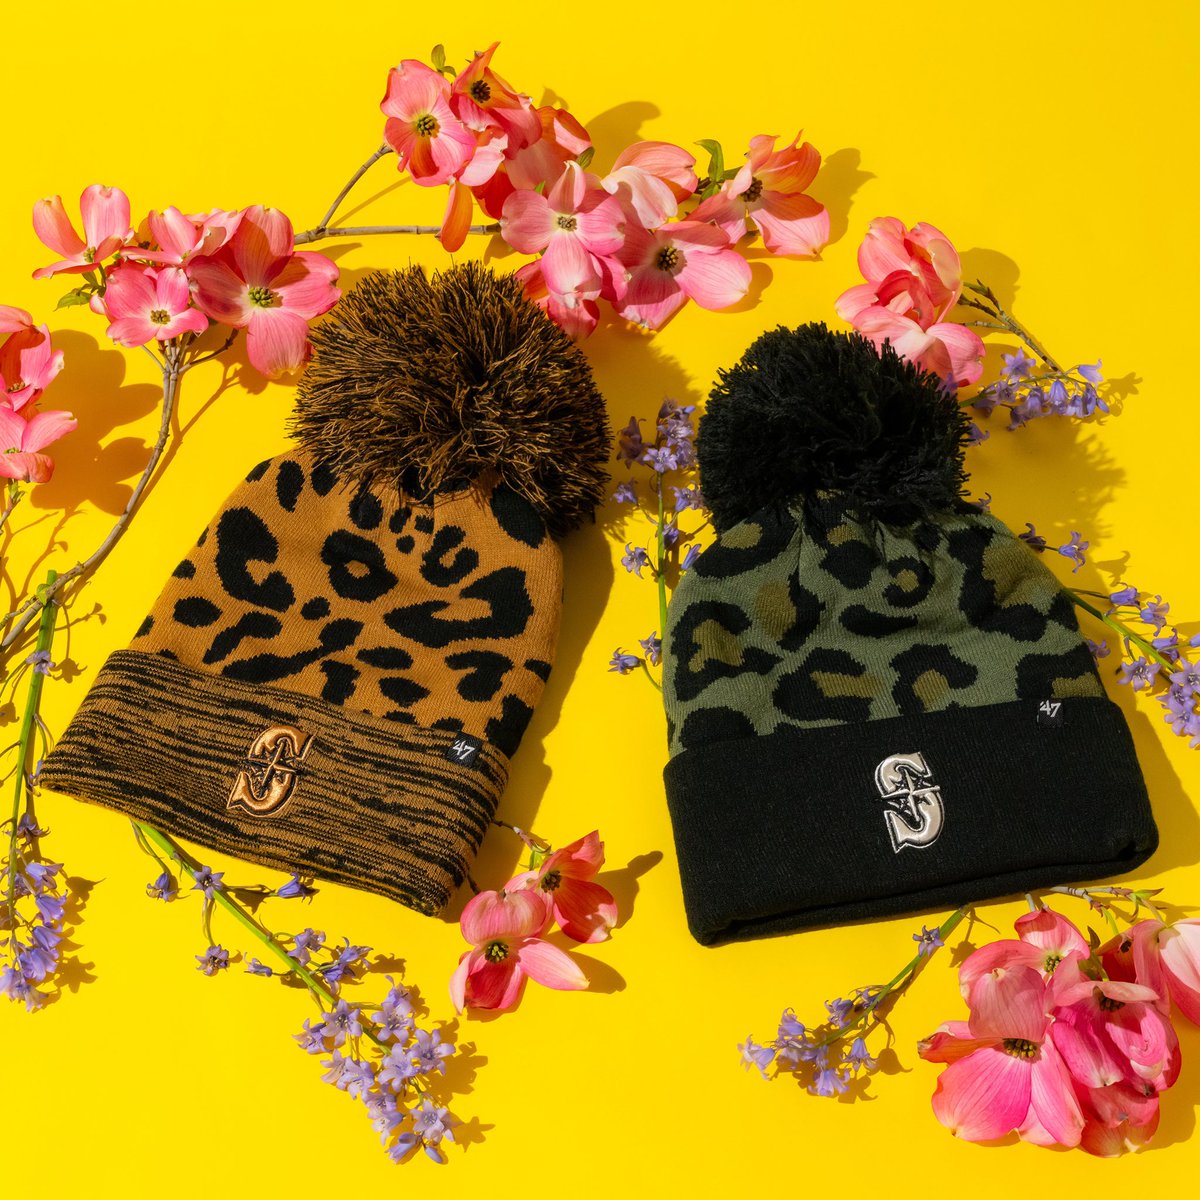 Our Mother’s Day Gift Guide is here! We will post unique and trendy gift ideas over the next week leading up to Mother’s Day. First up….women’s caps and knits in animal prints and florals! 🌸🌺🌼